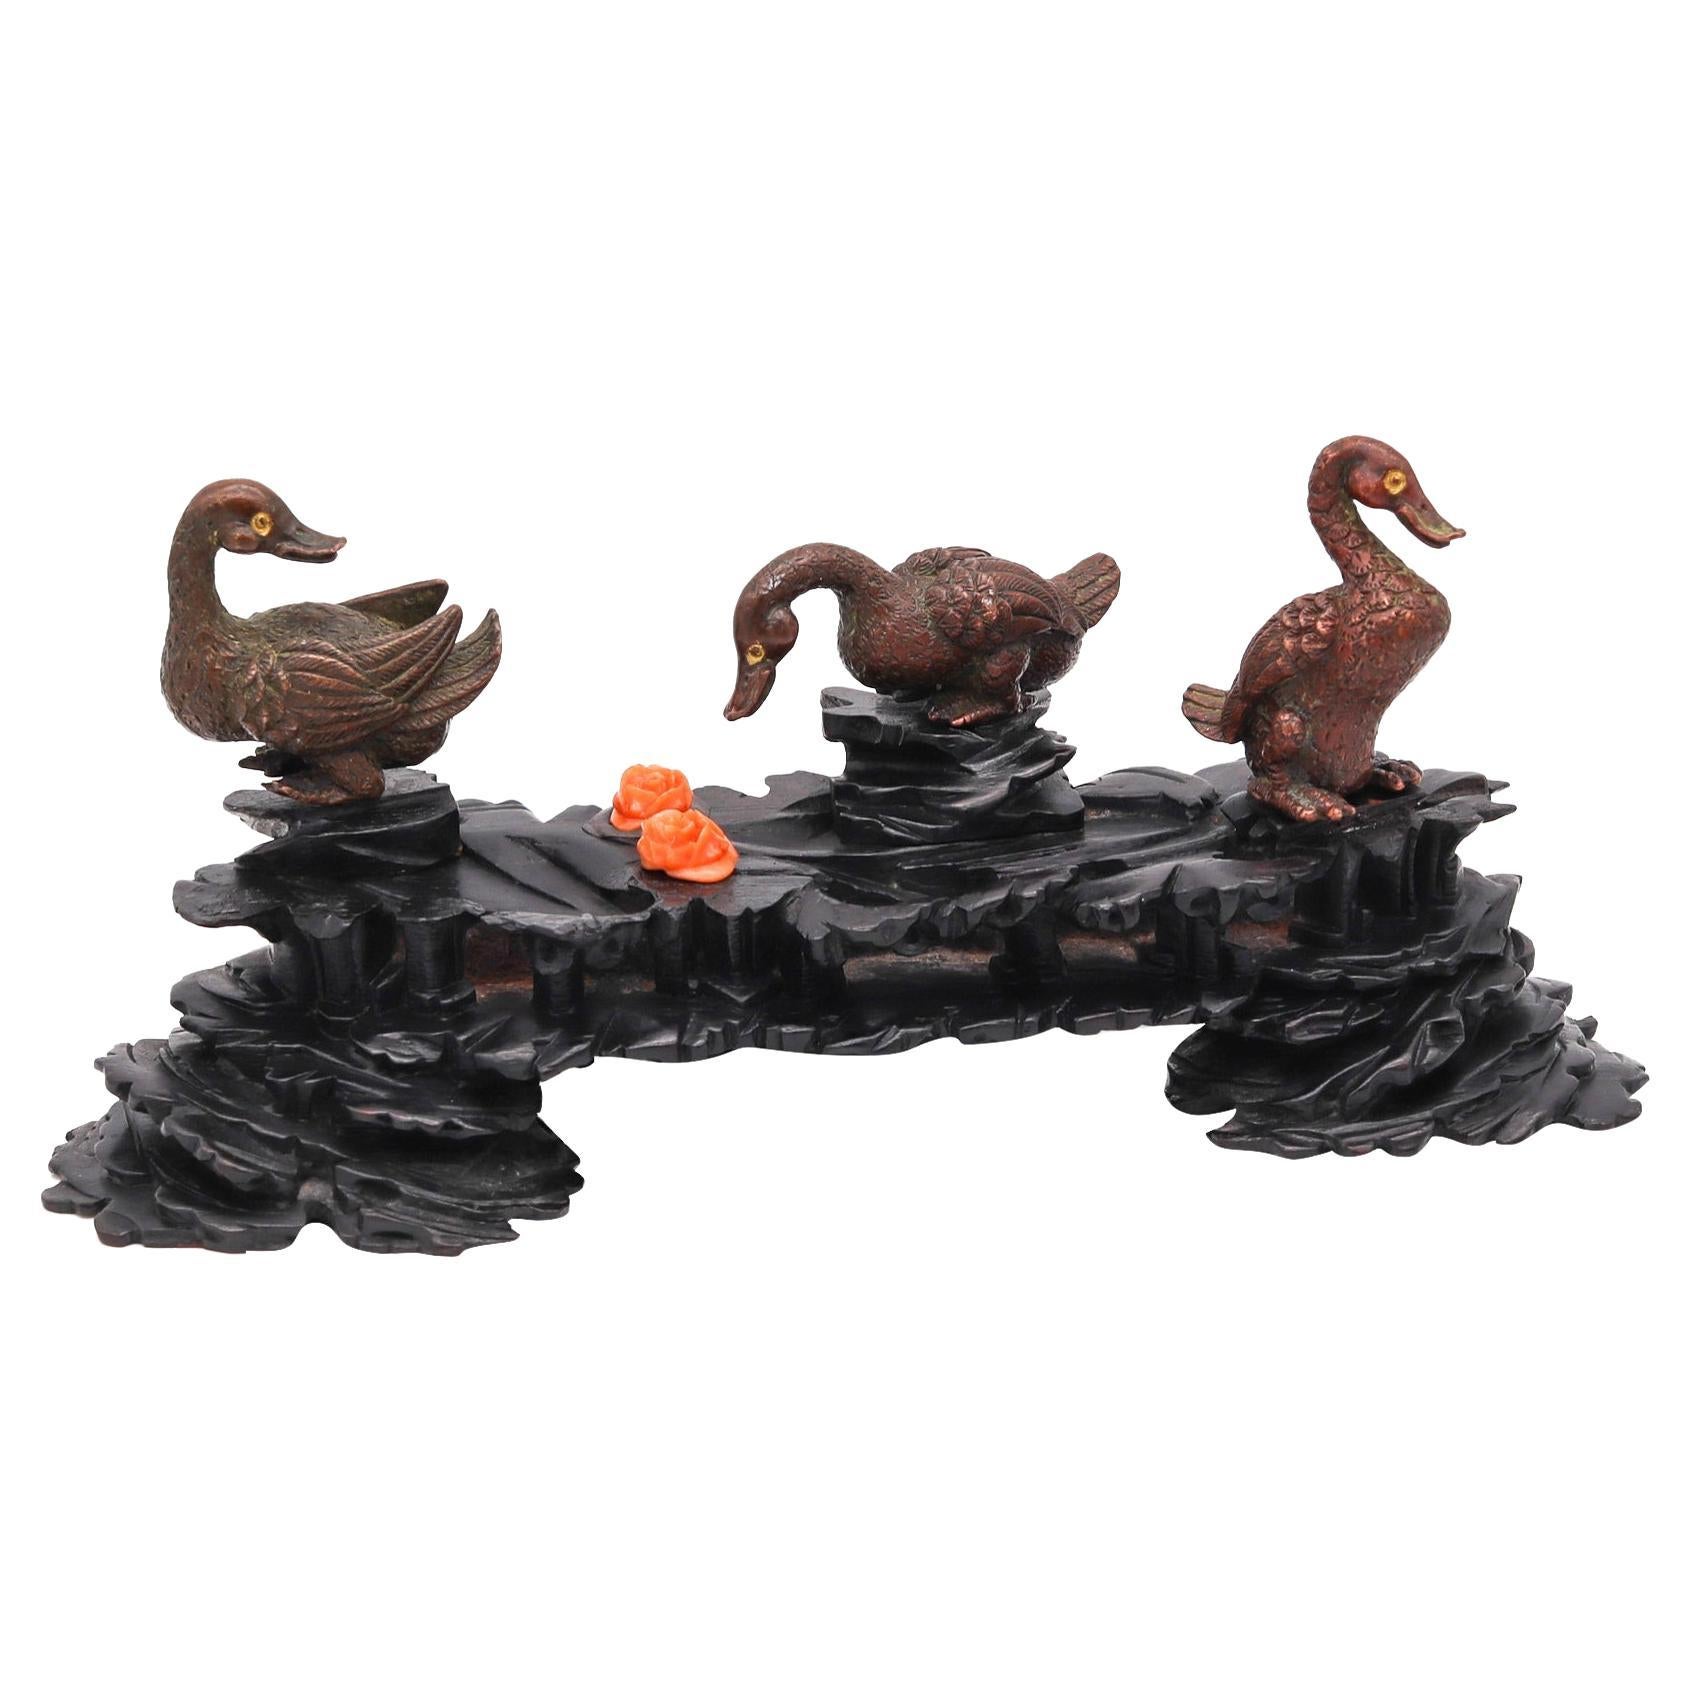 Japan Meiji 1900 Three Bronze Ducks Sculpture in Wood Stand and Coral For Sale